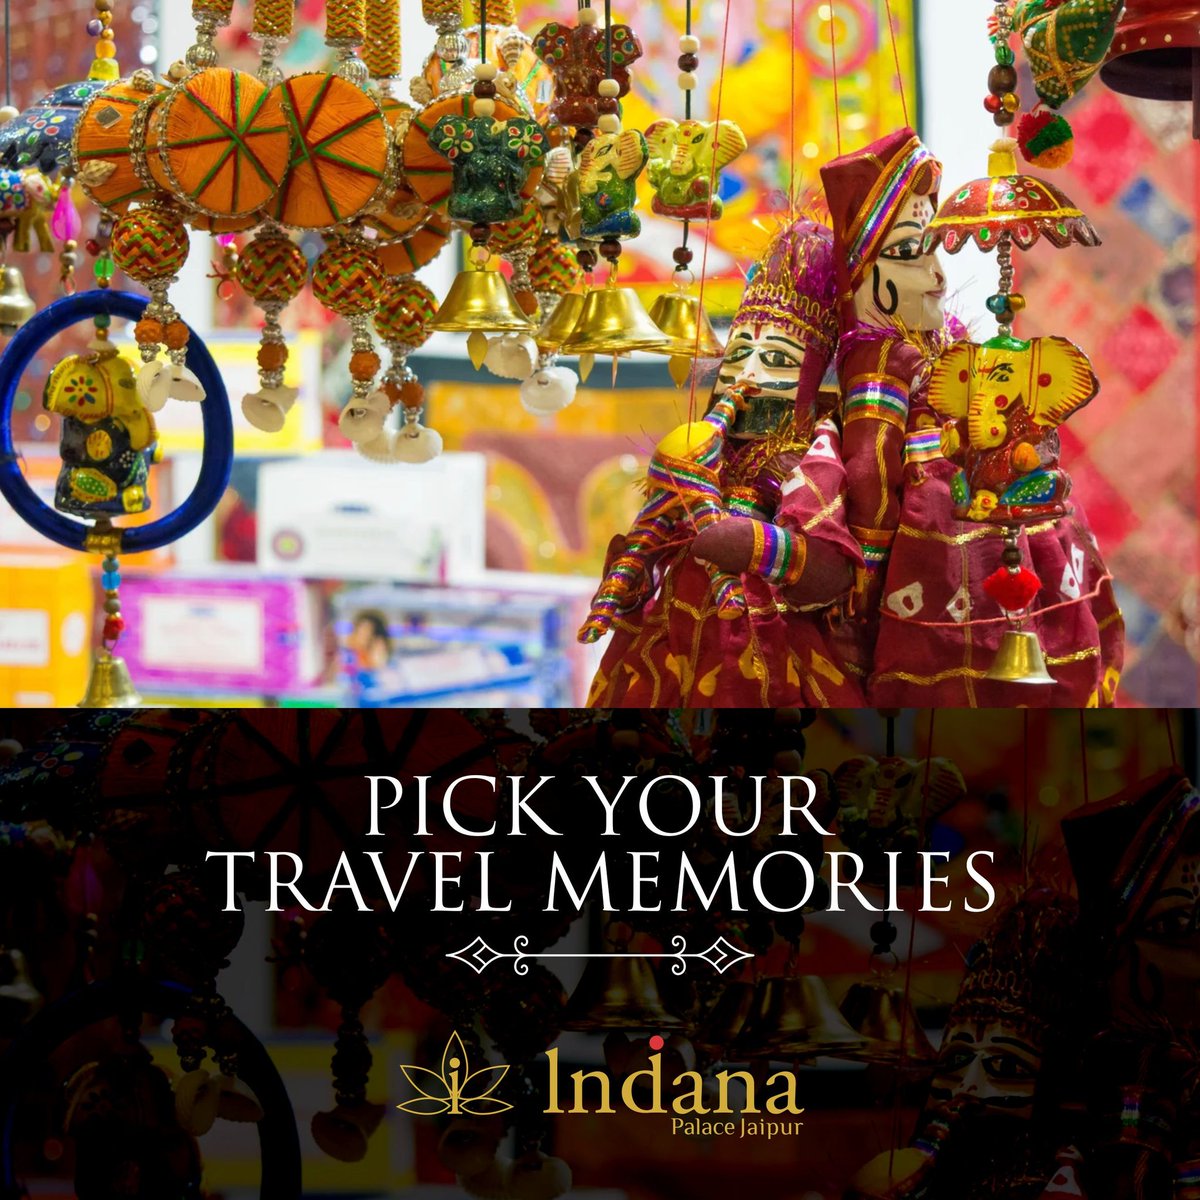 Enjoyed a stay at Indana Palace Jaipur?
Visit our shopping boutiques and take back a souvenir to cherish these moments forever.😊
jaipur.indanahotels.com
01426 401100 / 01426 401111

#IndanaPalaceJaipur #ShoppingBoutique #JaipurSouvenirs #Jaipur